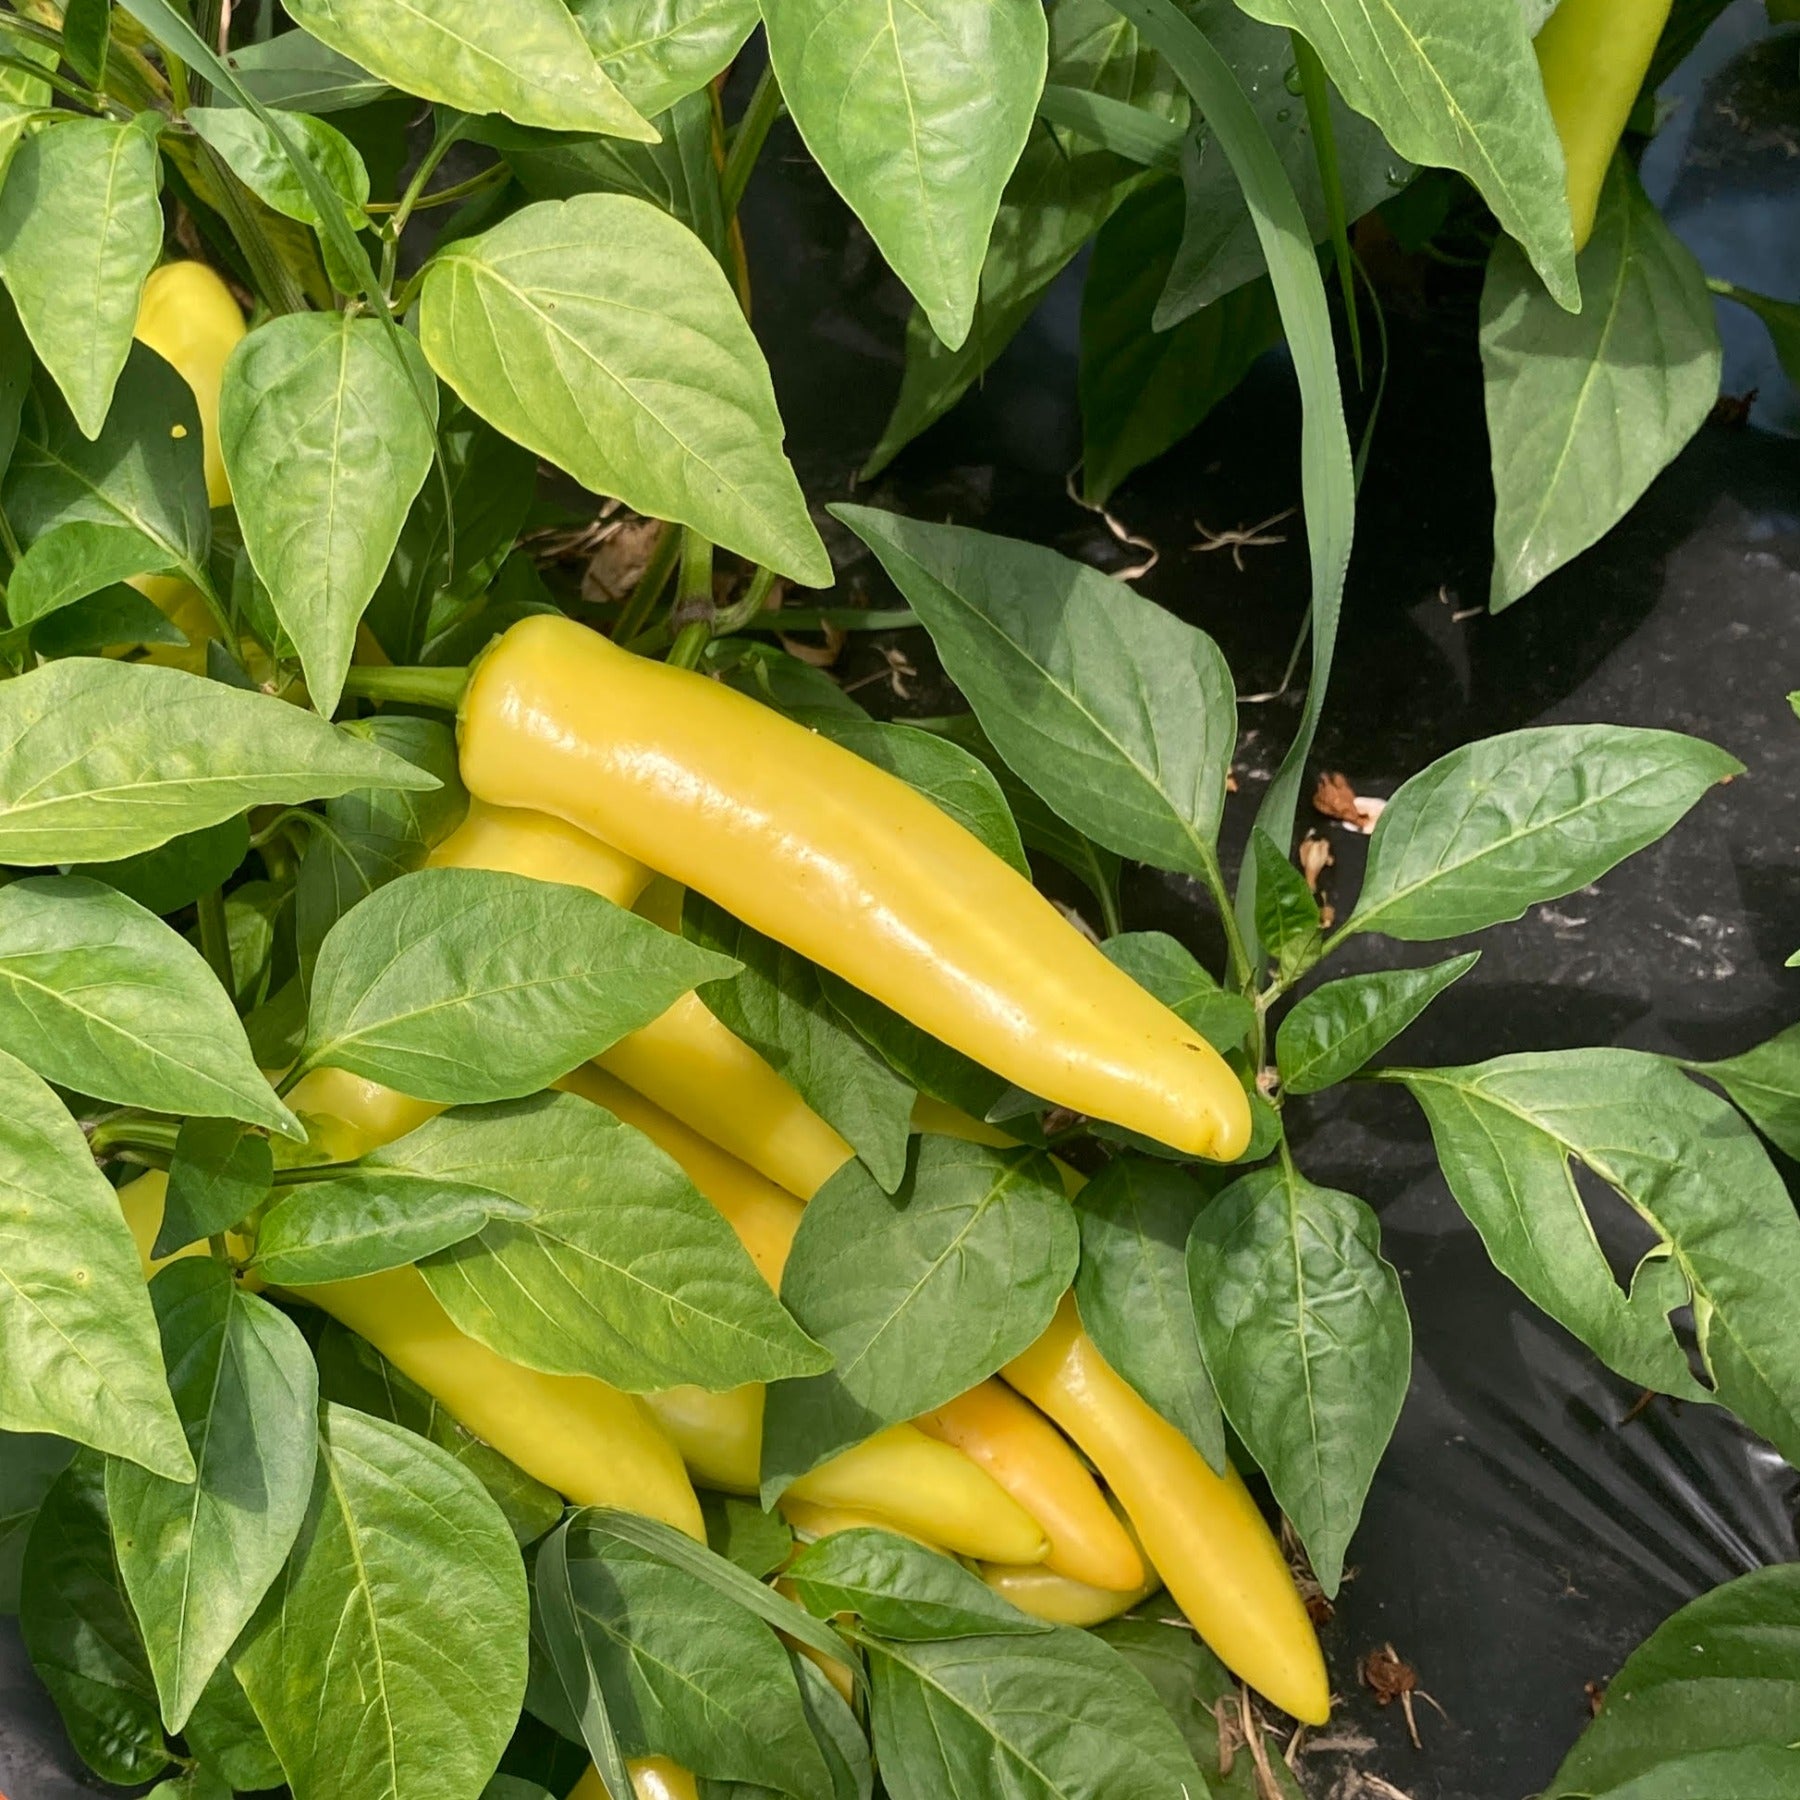 A pepper plant loaded with Hungarian Hot Wax peppers before harvest